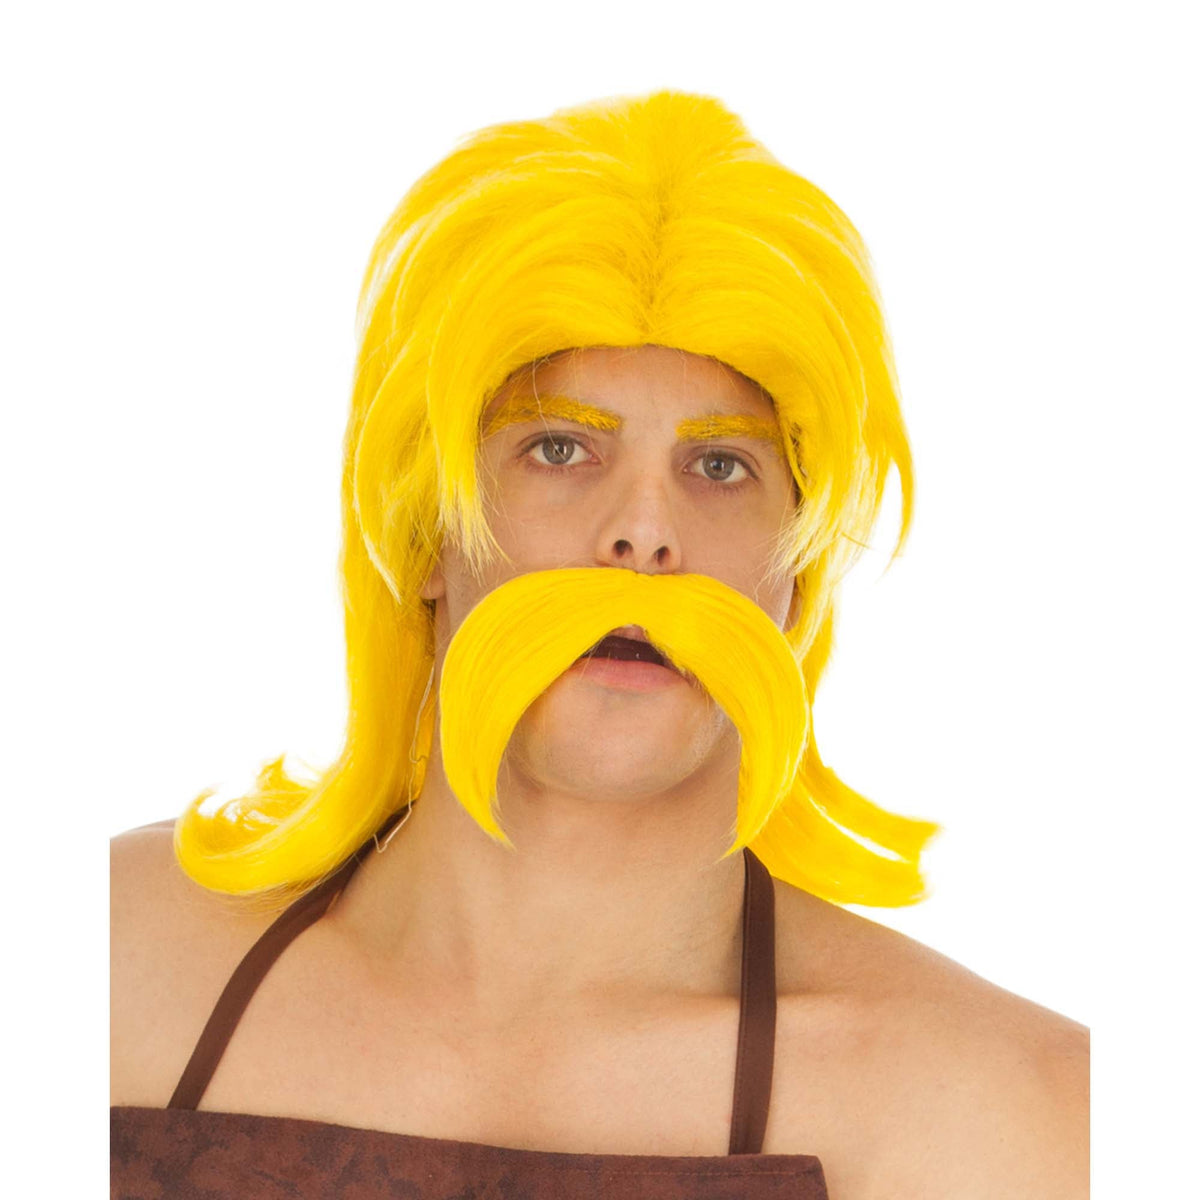 CHAKS Costume Accessories Cetautomatix Yellow Wig and Mustache for Adults, Asterix and Obelix